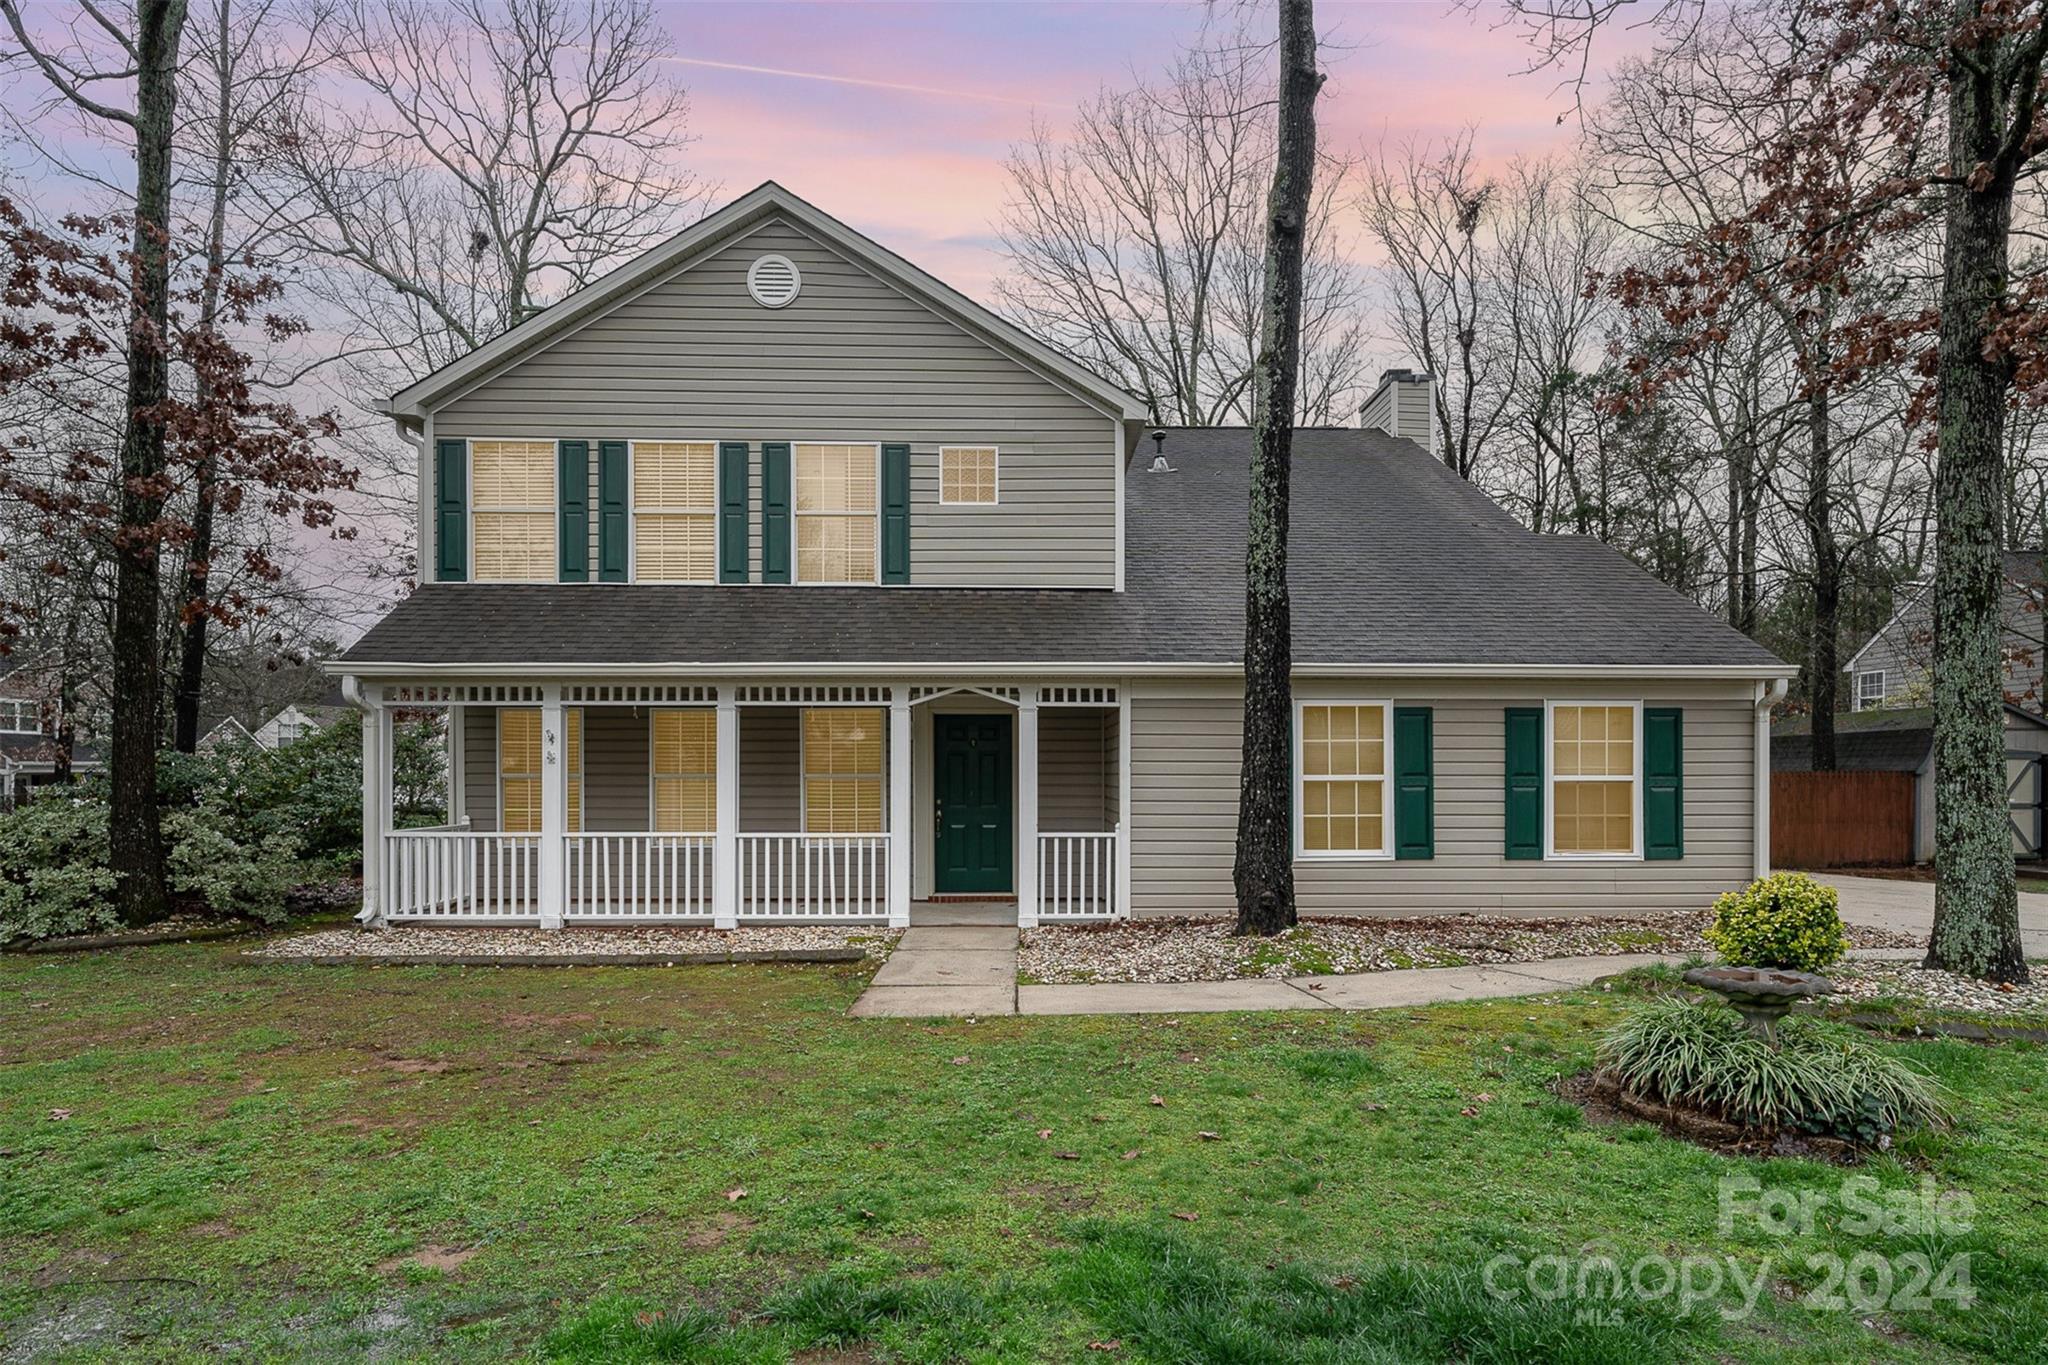 Photo one of 4501 Crystal Creek Ct Indian Trail NC 28079 | MLS 4117660